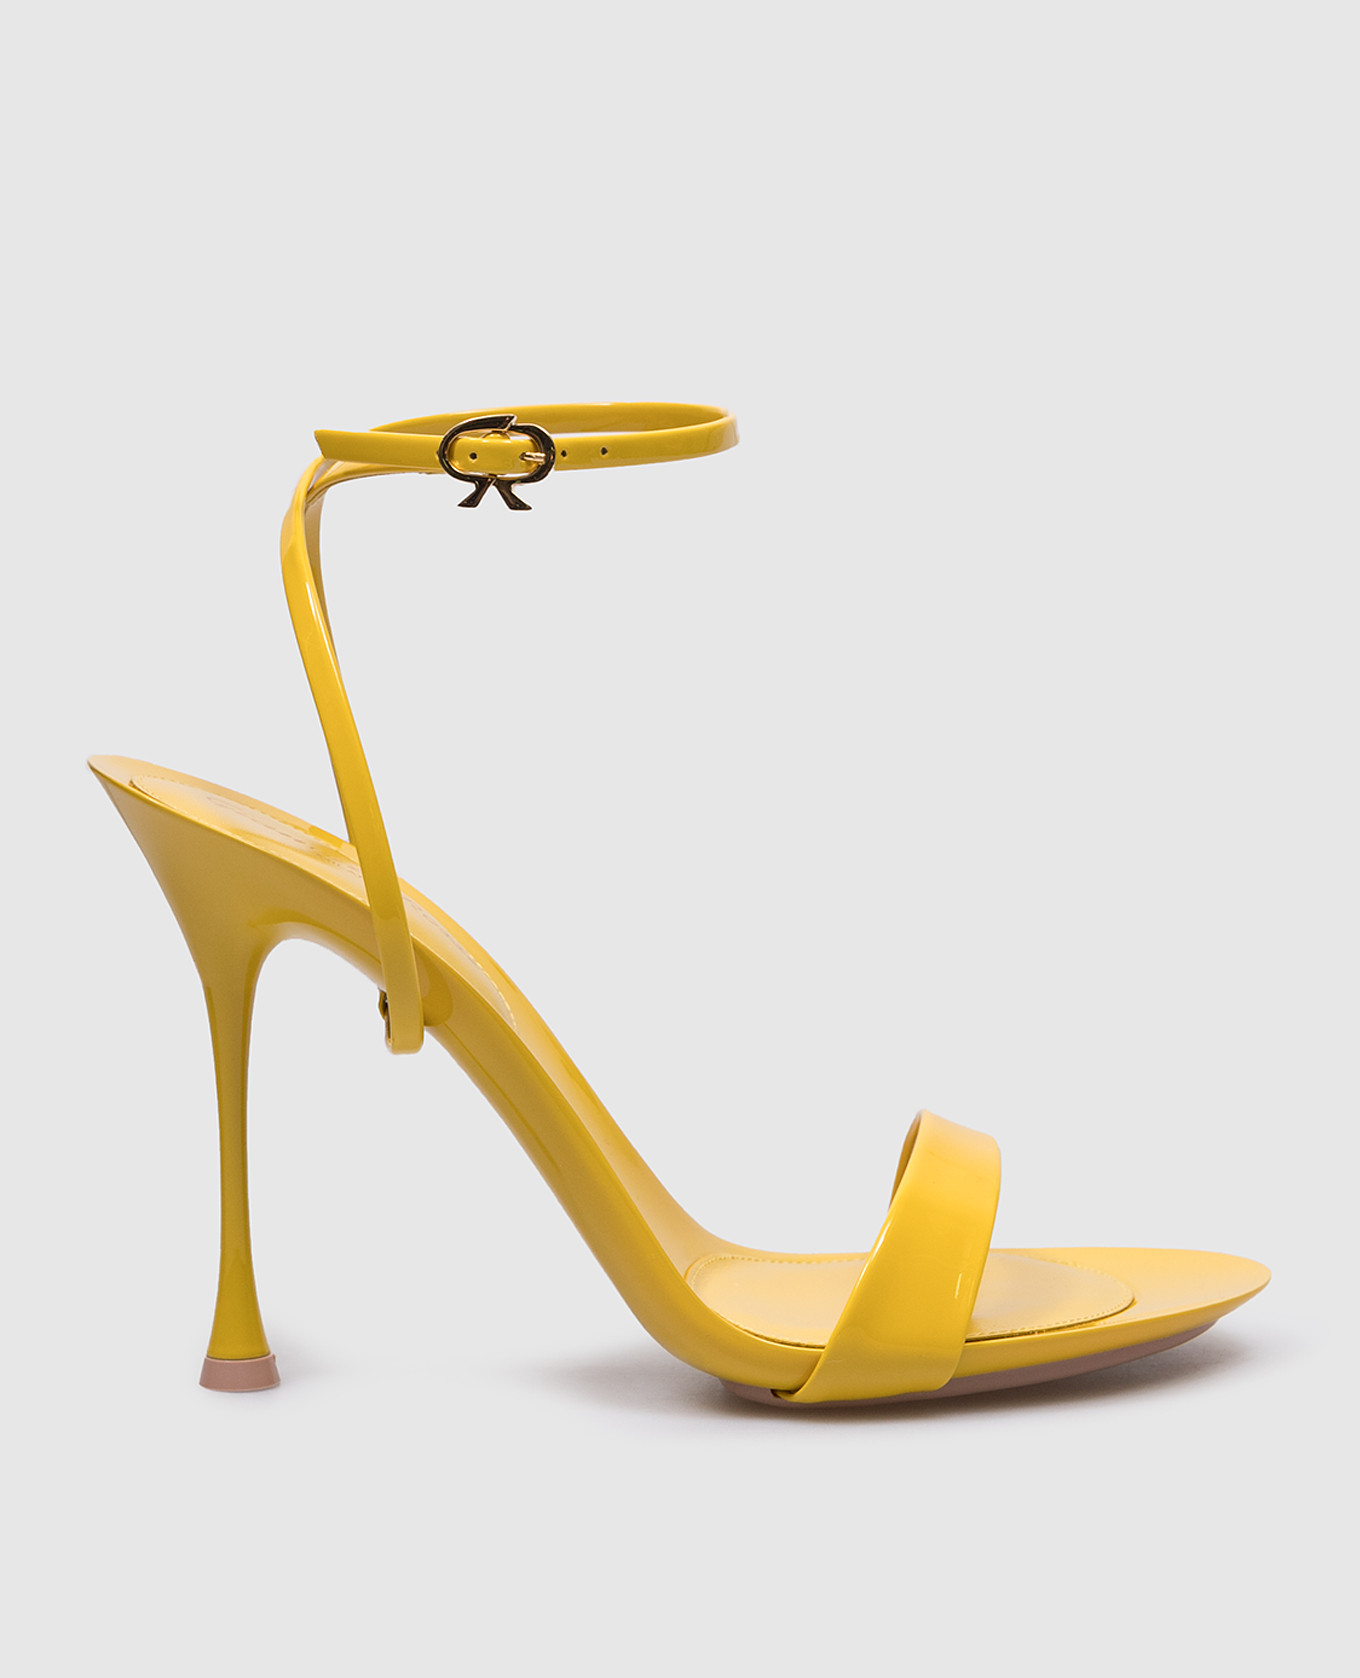 Spice yellow patent leather sandals